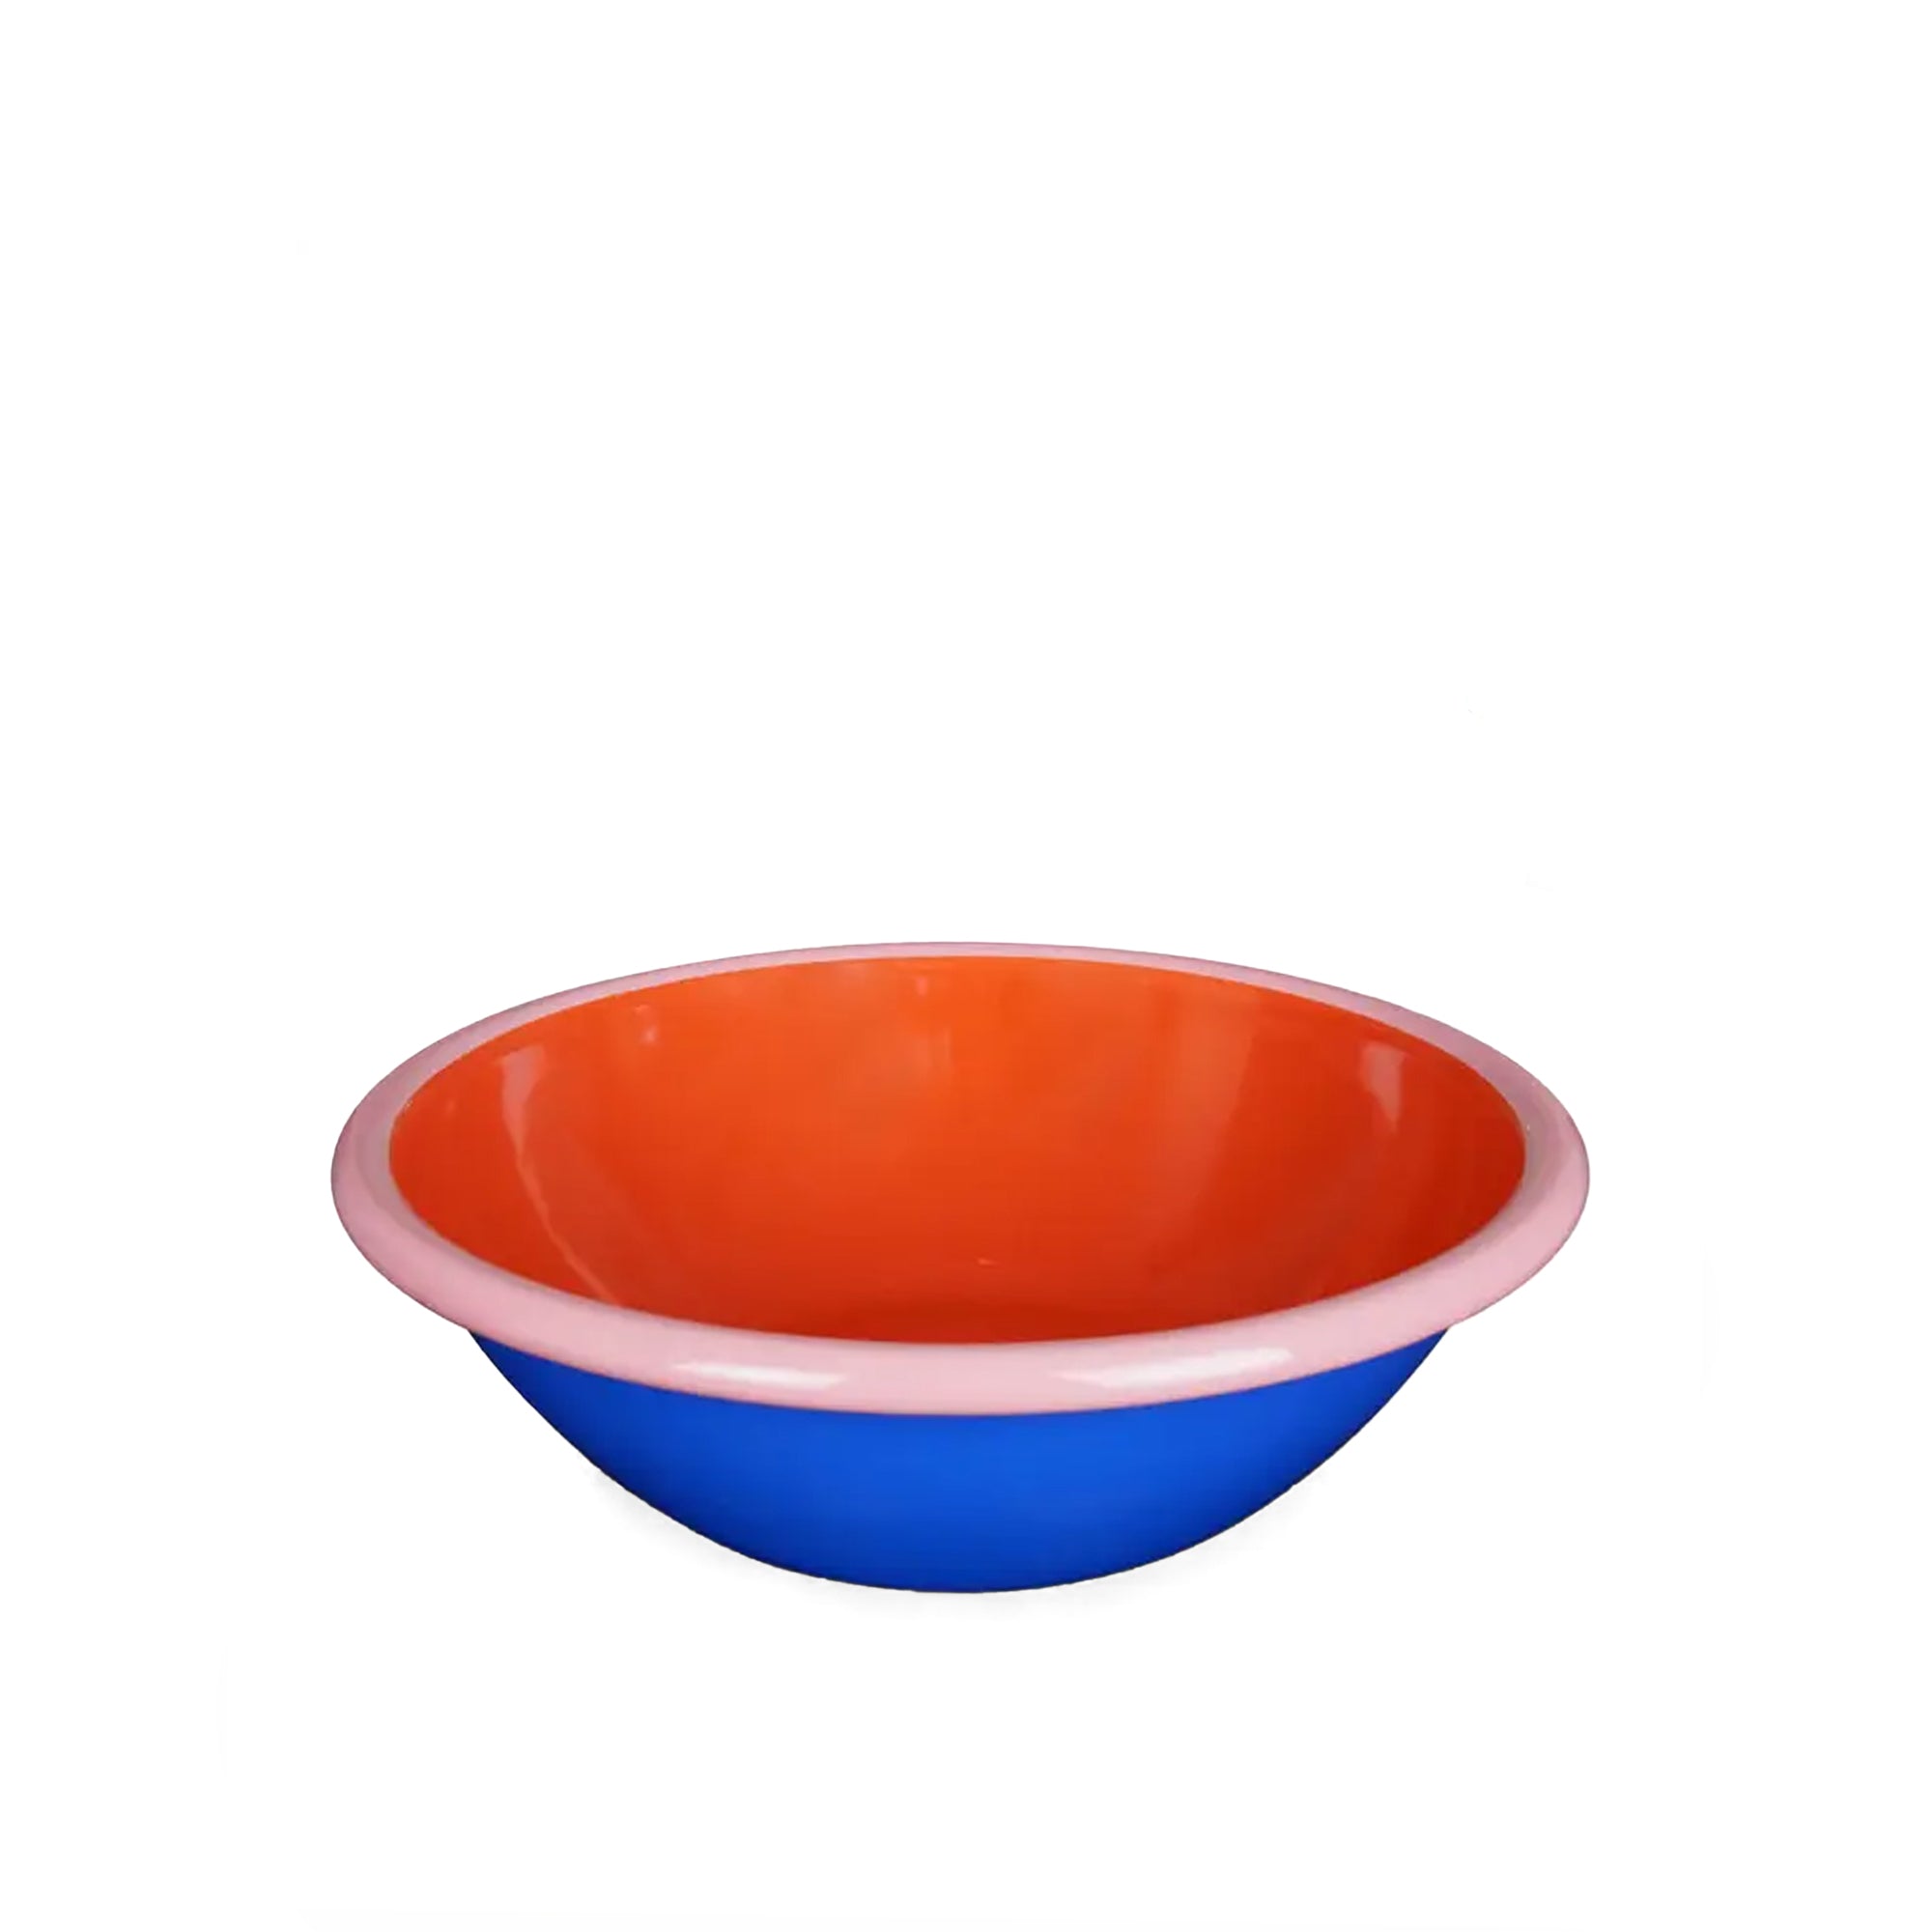 Colorama Small Serving Bowl, 7.75"